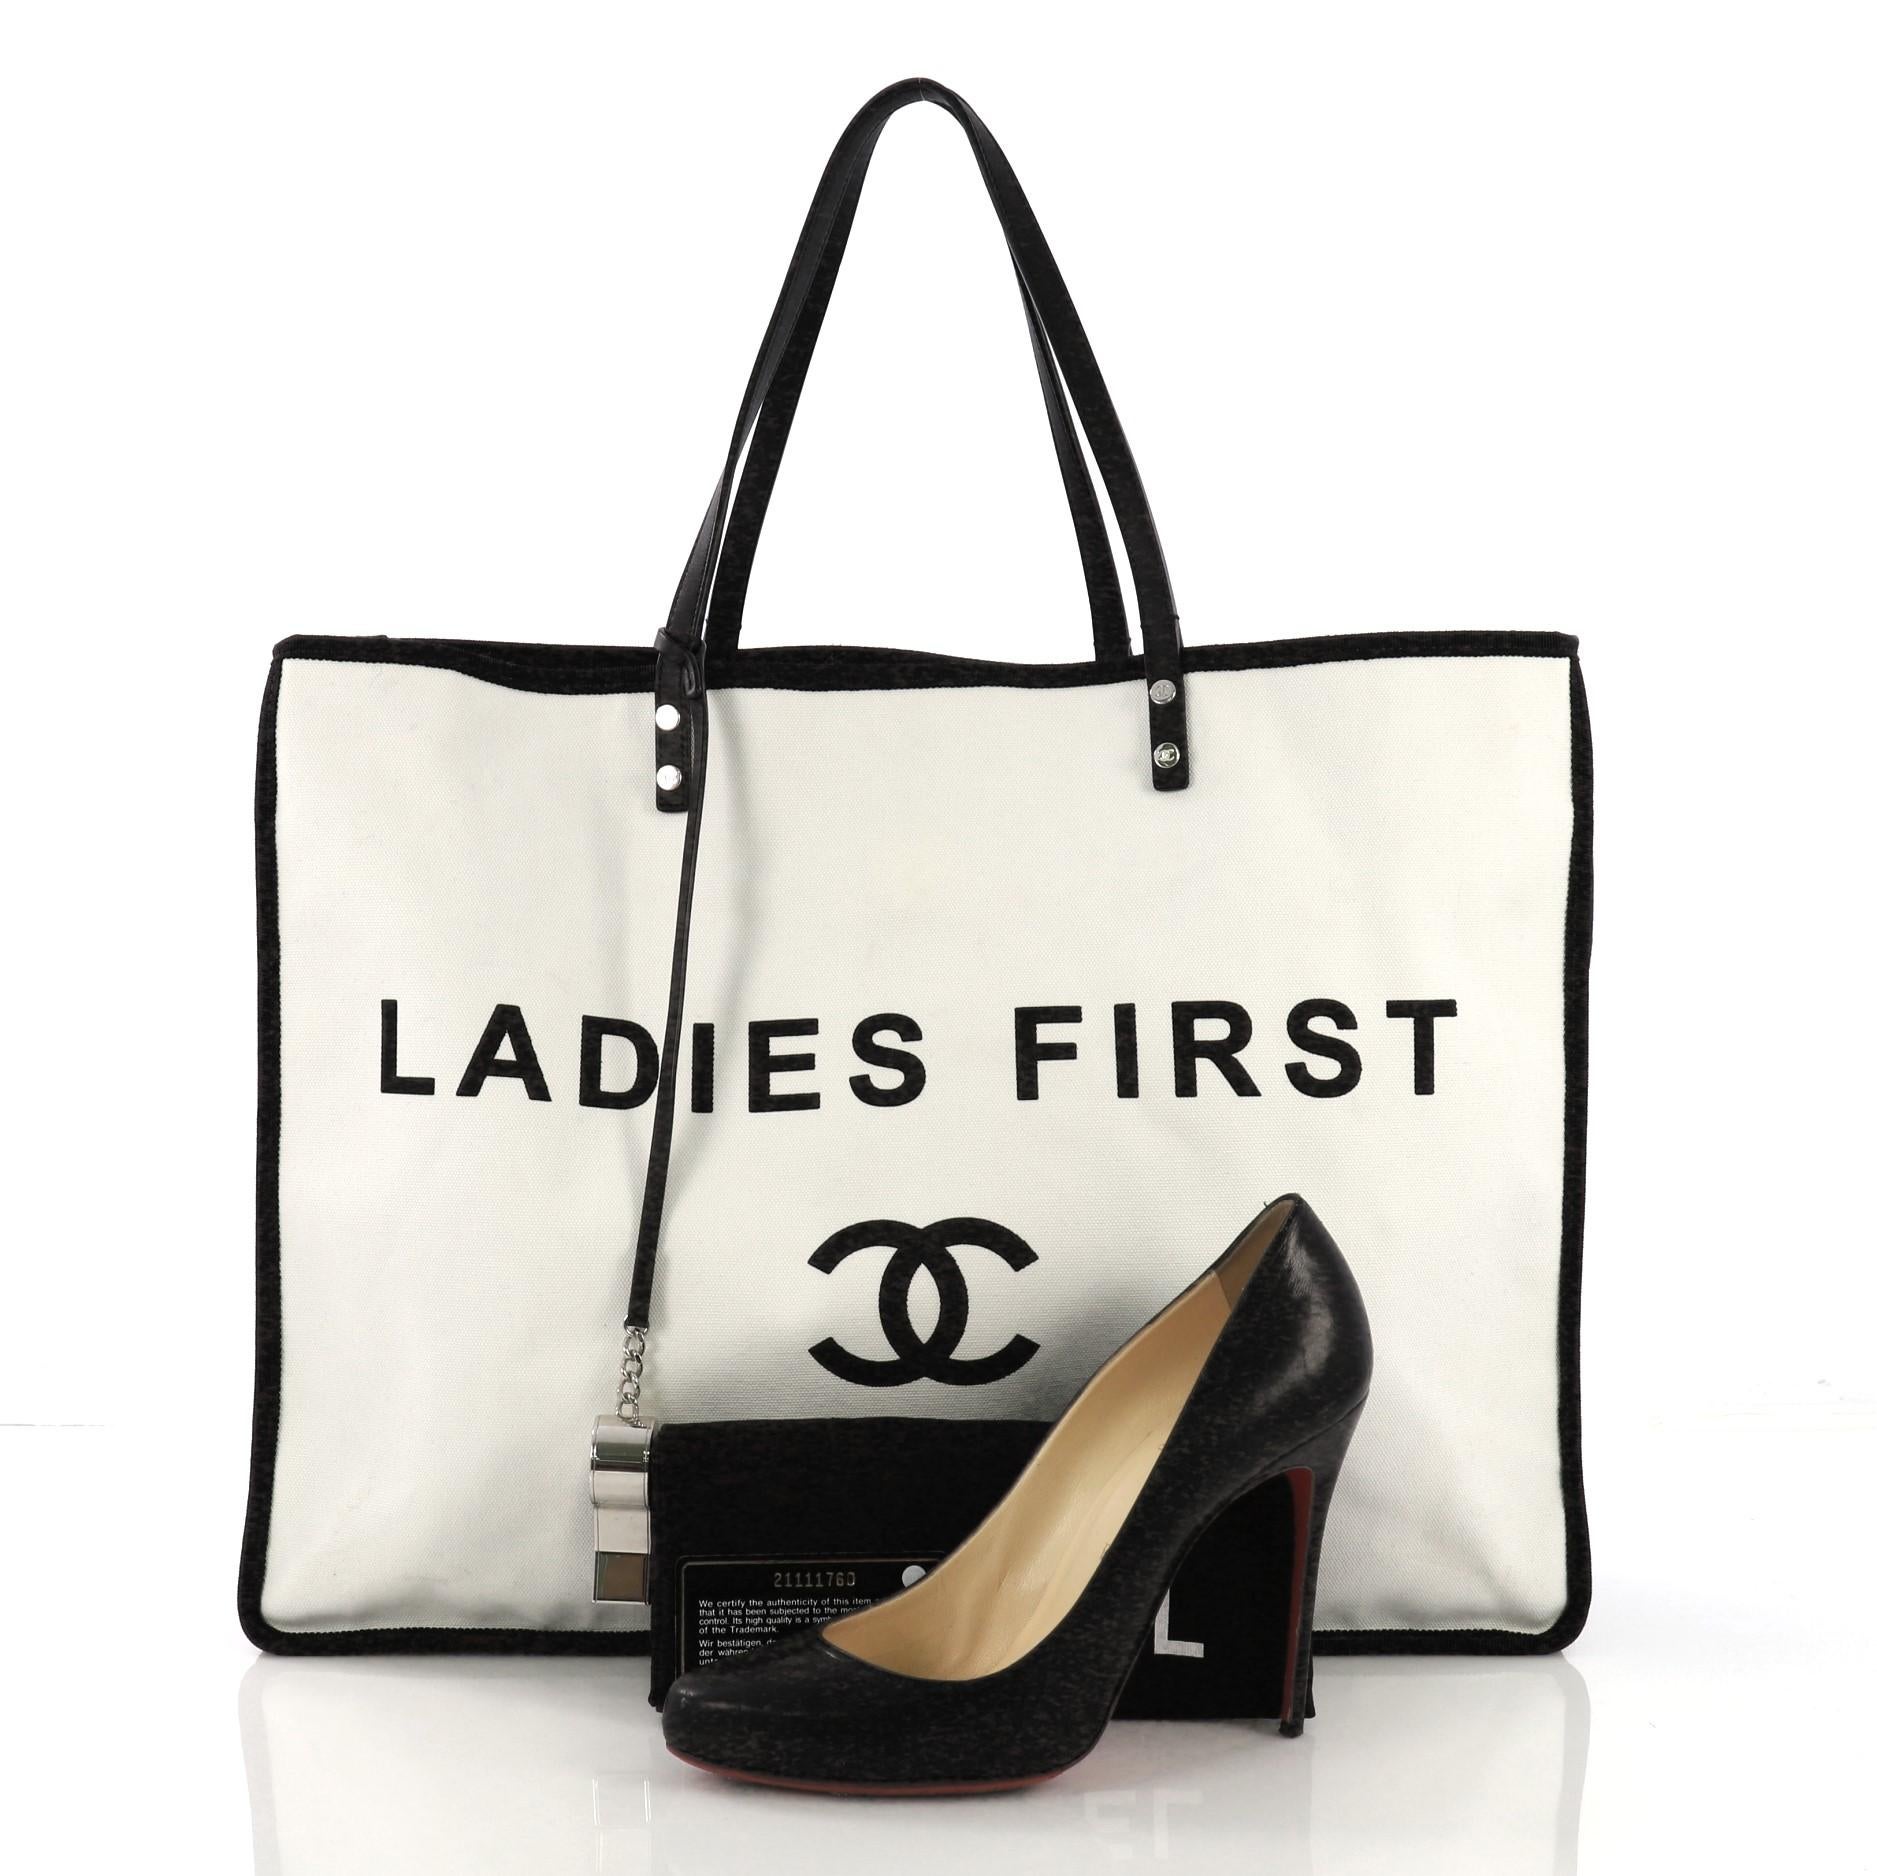 This Chanel Let's Demonstrate Tote Canvas Large, crafted from white and black canvas, features print of Ladies First and CC logo on the front, dual leather top handles, and silver-tone hardware. Its wide open top showcases a burgundy fabric interior